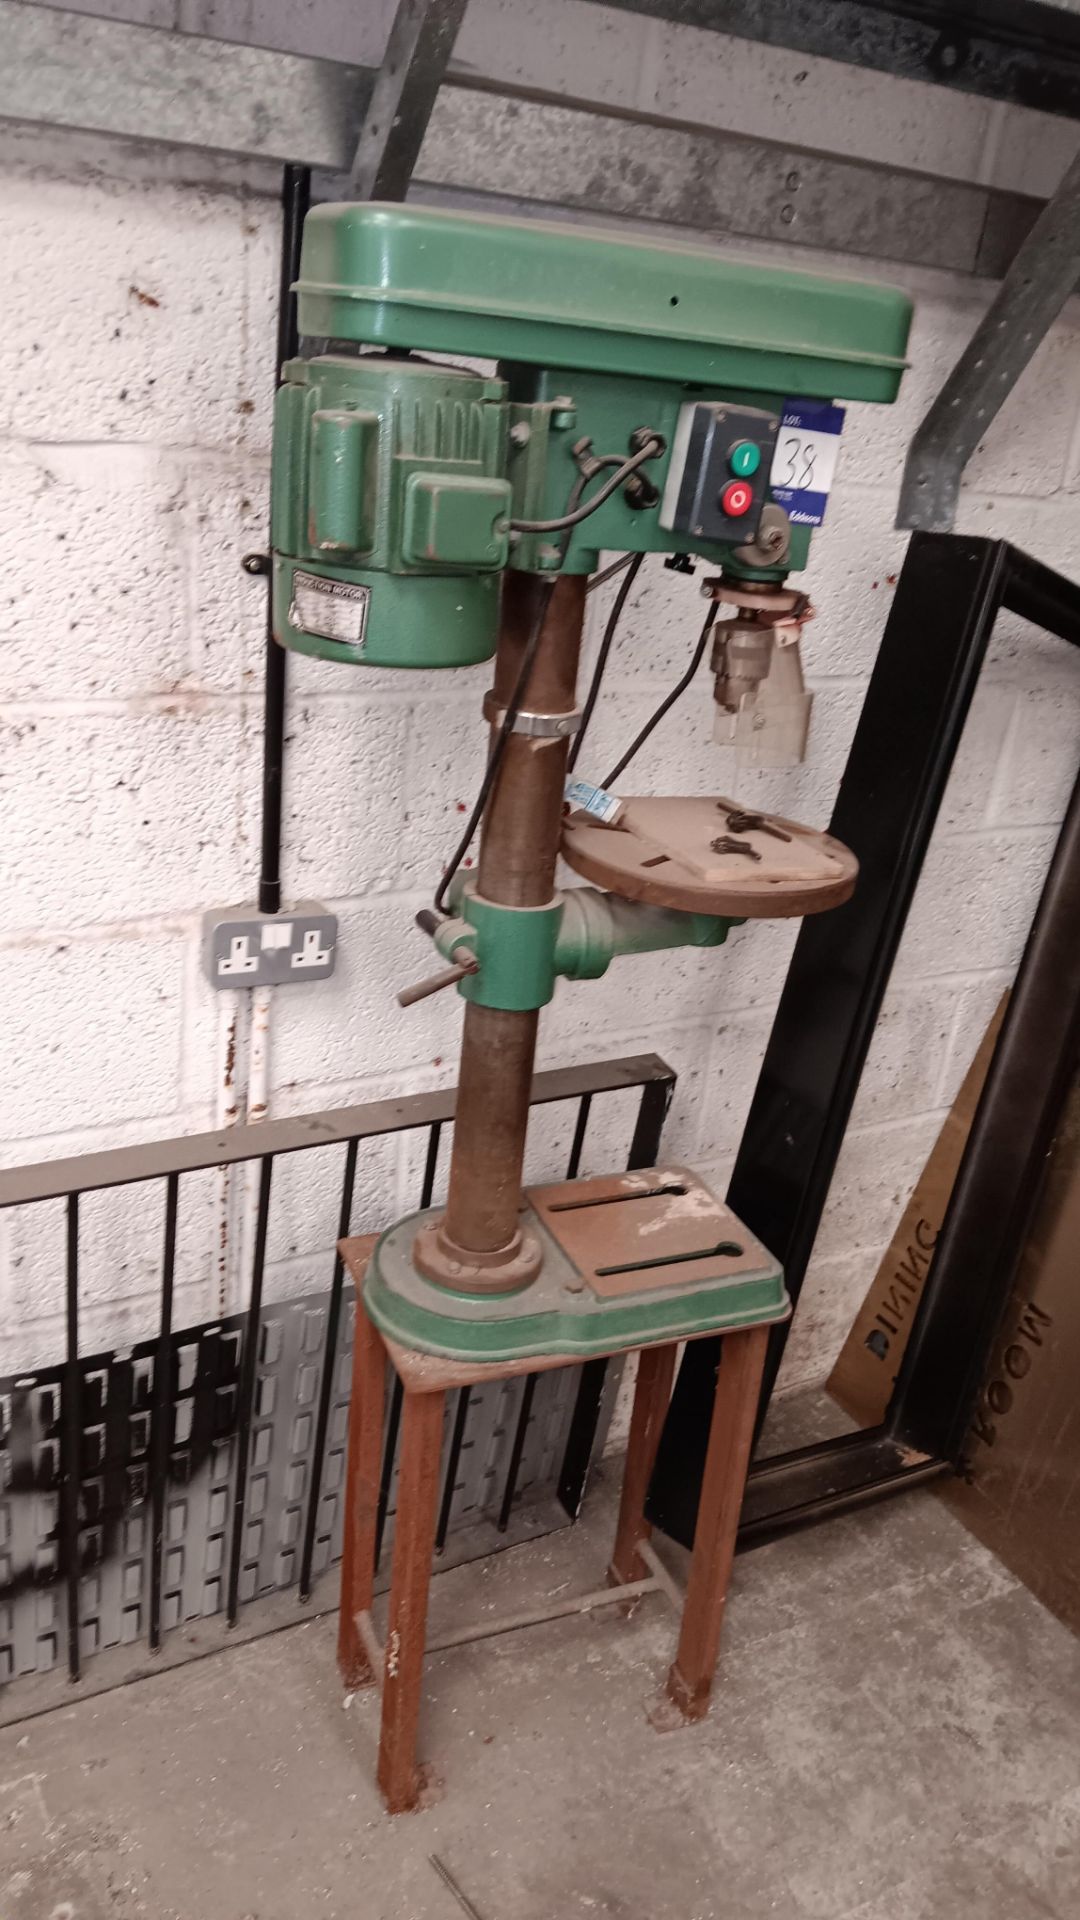 Nu-Tool N-78 16 speed drill press, serial number 893985 (1989) – Located on Unit 3 - Image 2 of 3